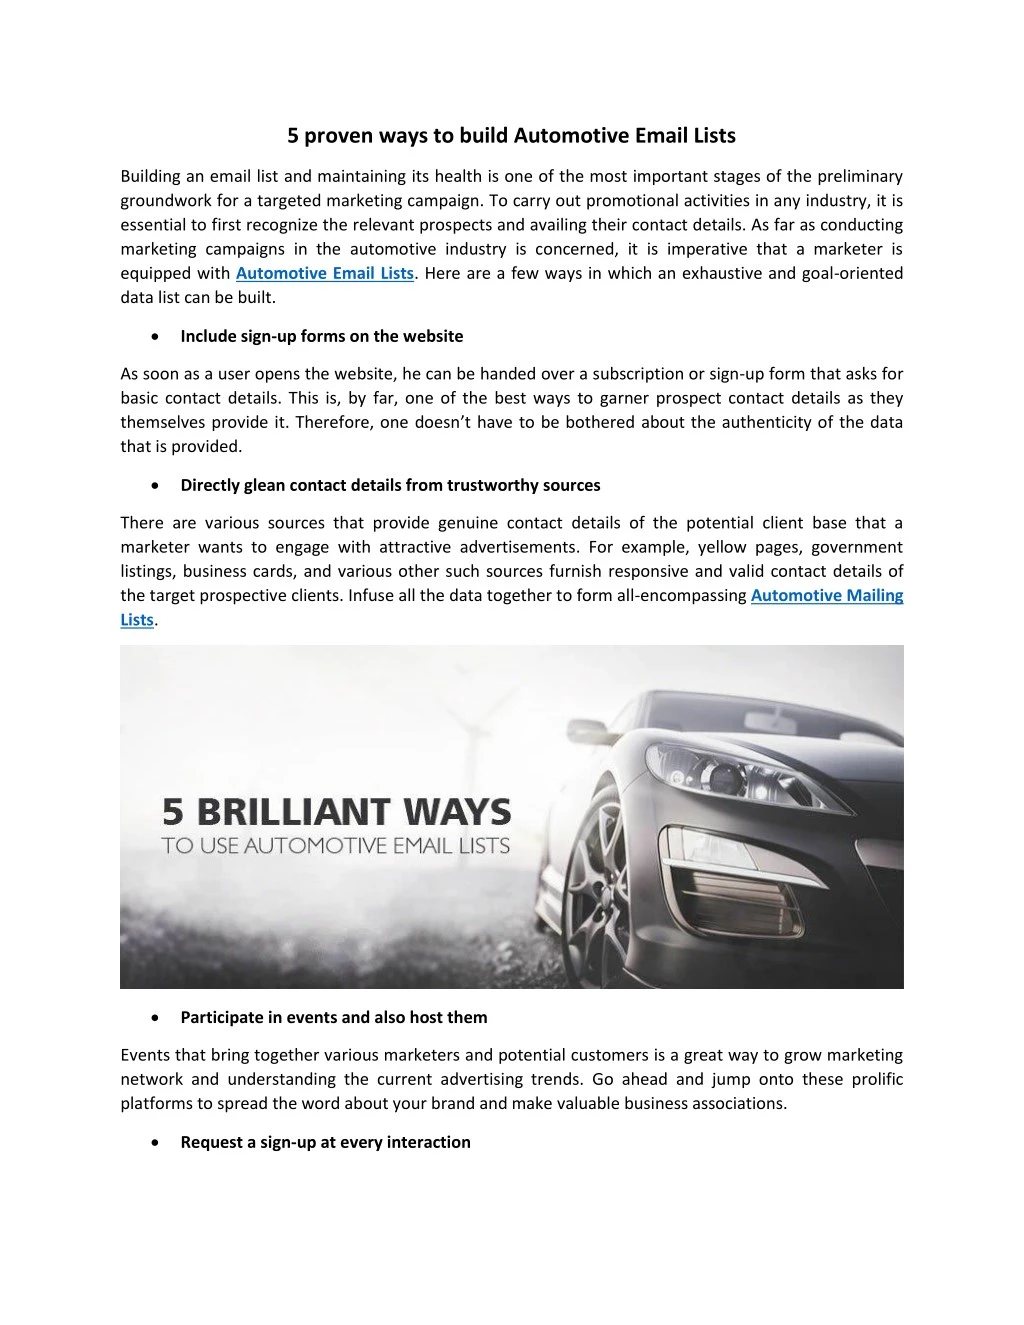 5 proven ways to build automotive email lists